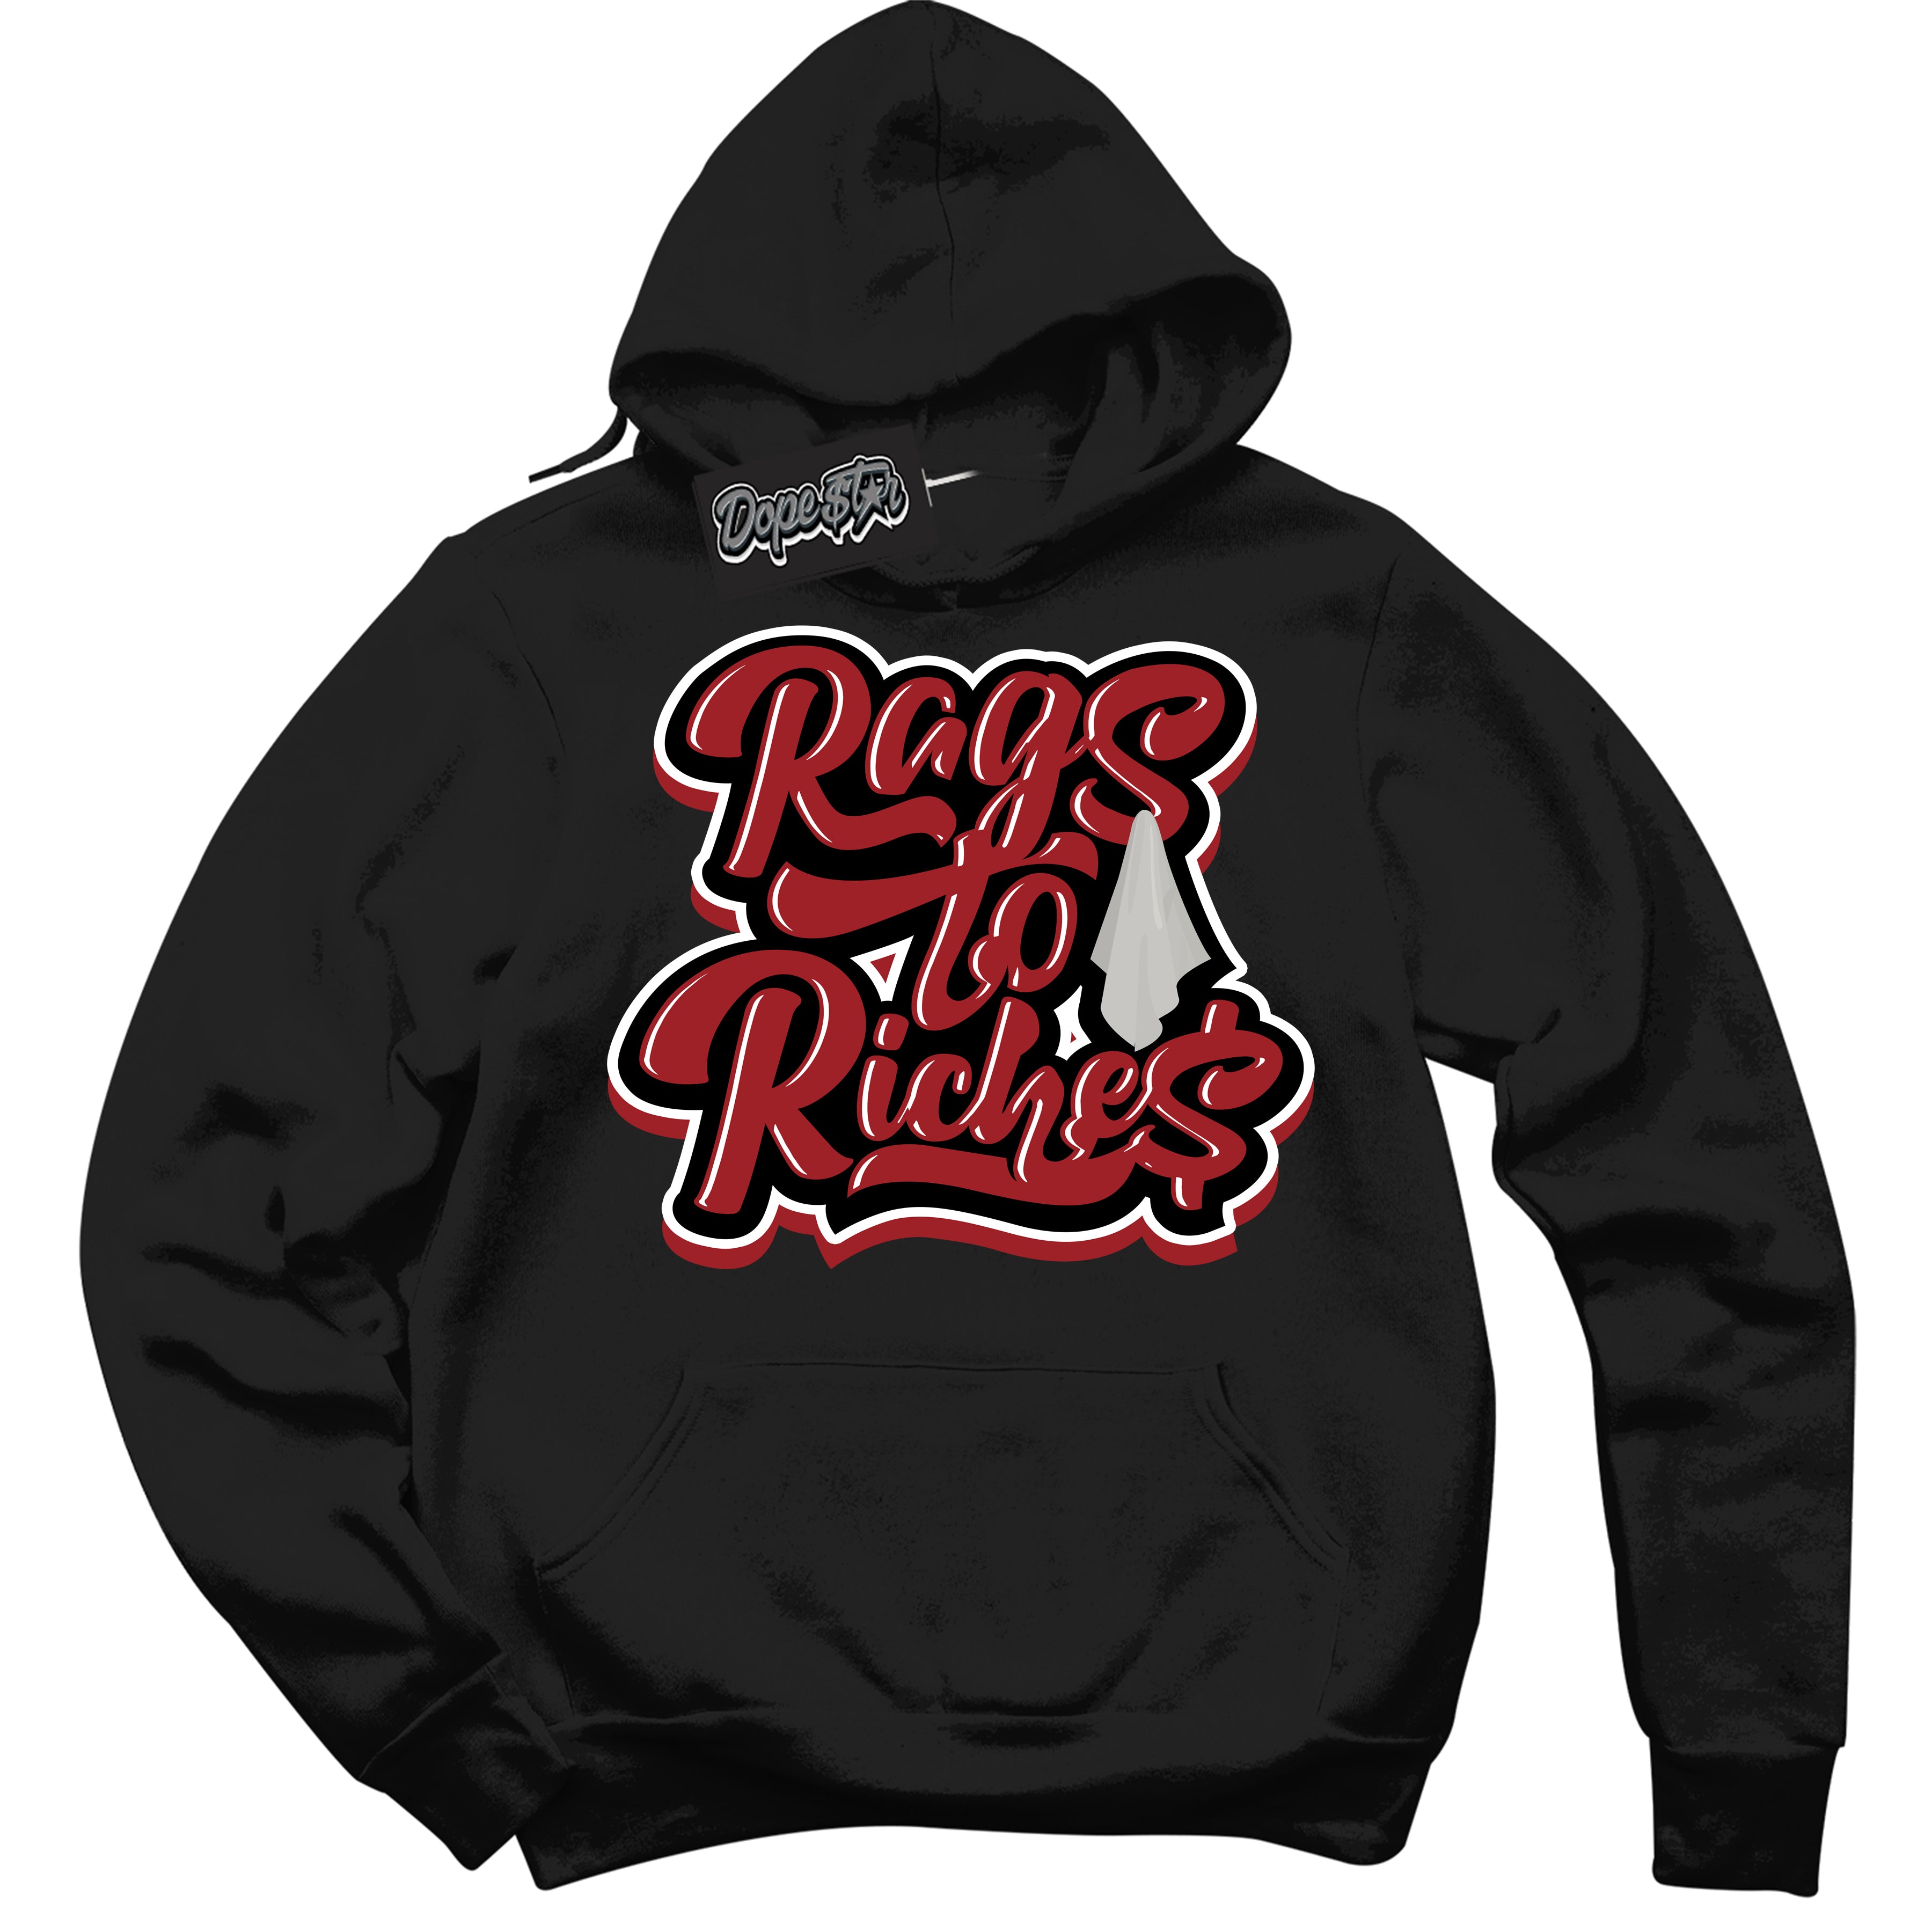 Cool Black Hoodie With “ Rags To Riches “ Design That Perfectly Matches Lost And Found 1s Sneakers